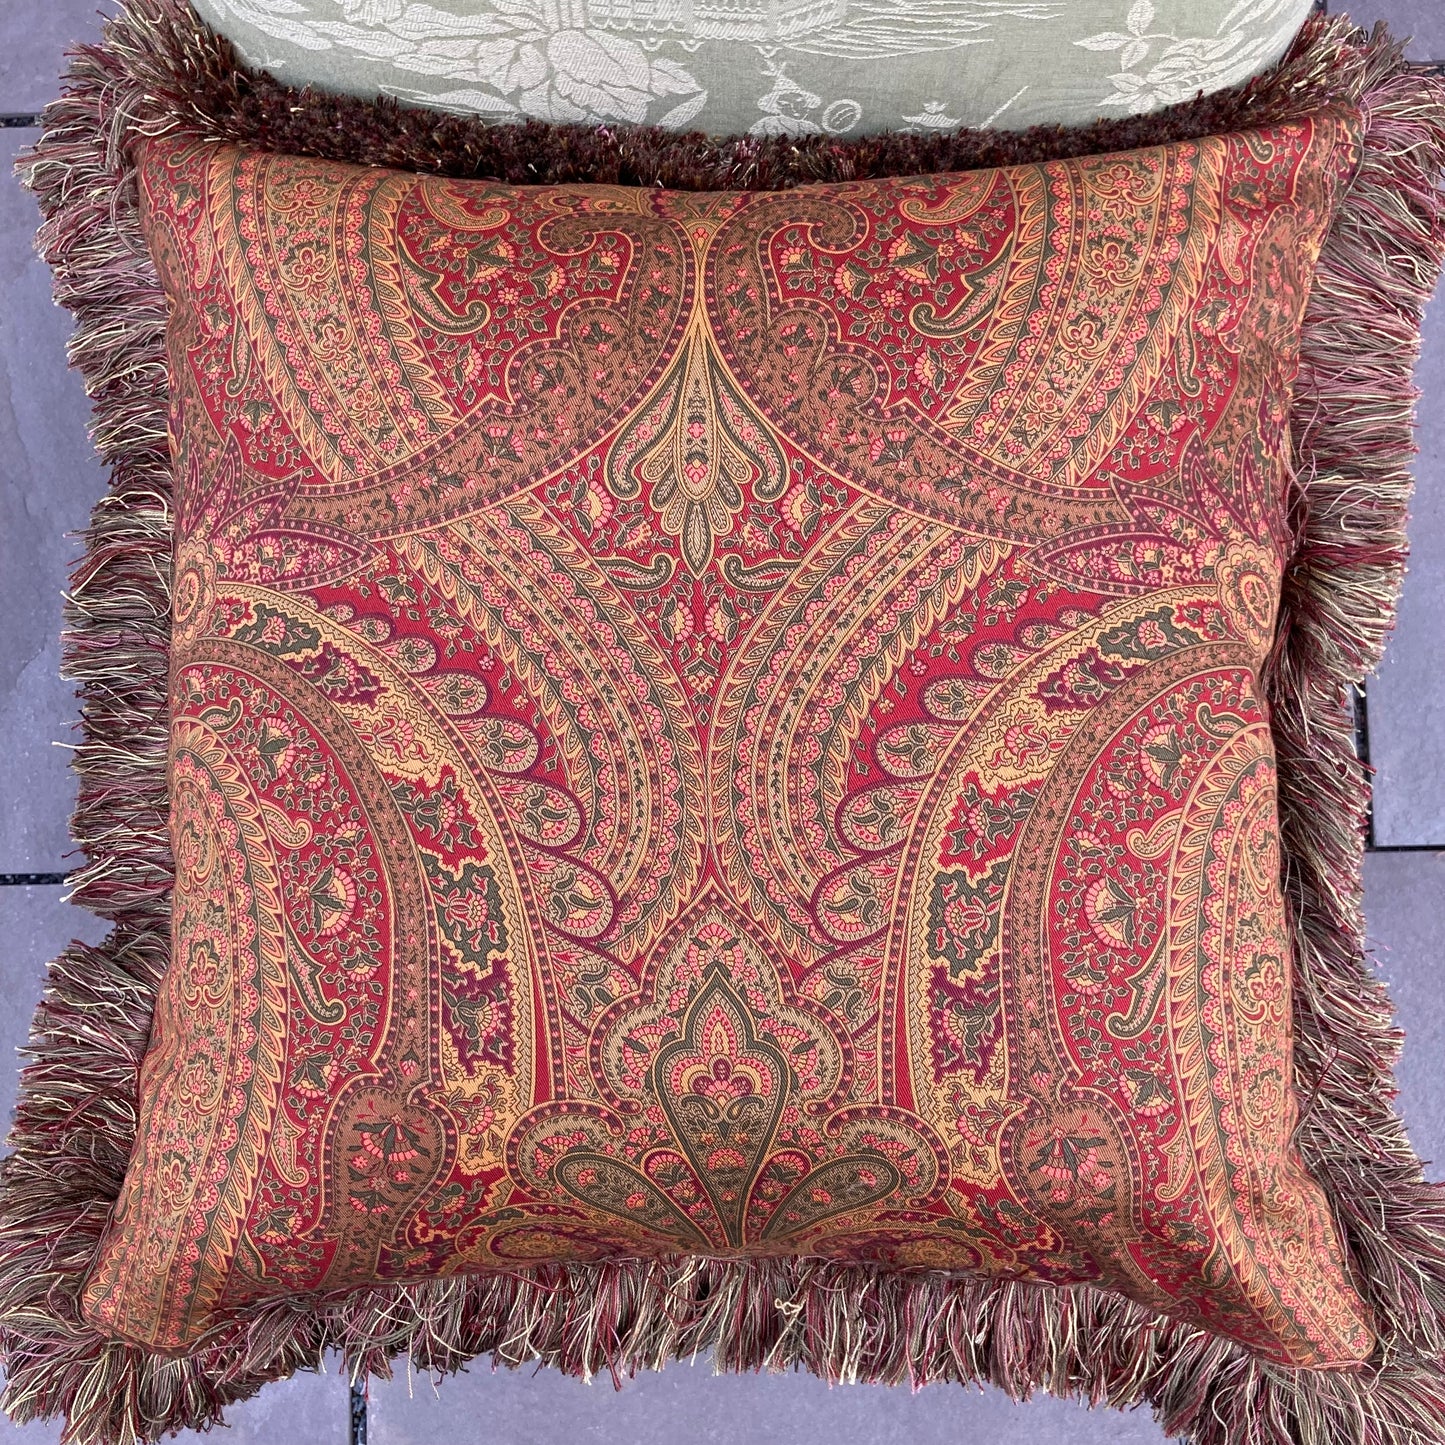 Traditional Crimson Velvet Paisley 21 x 21 Square Inches Decorative Pillow Front with Down Feather Insert